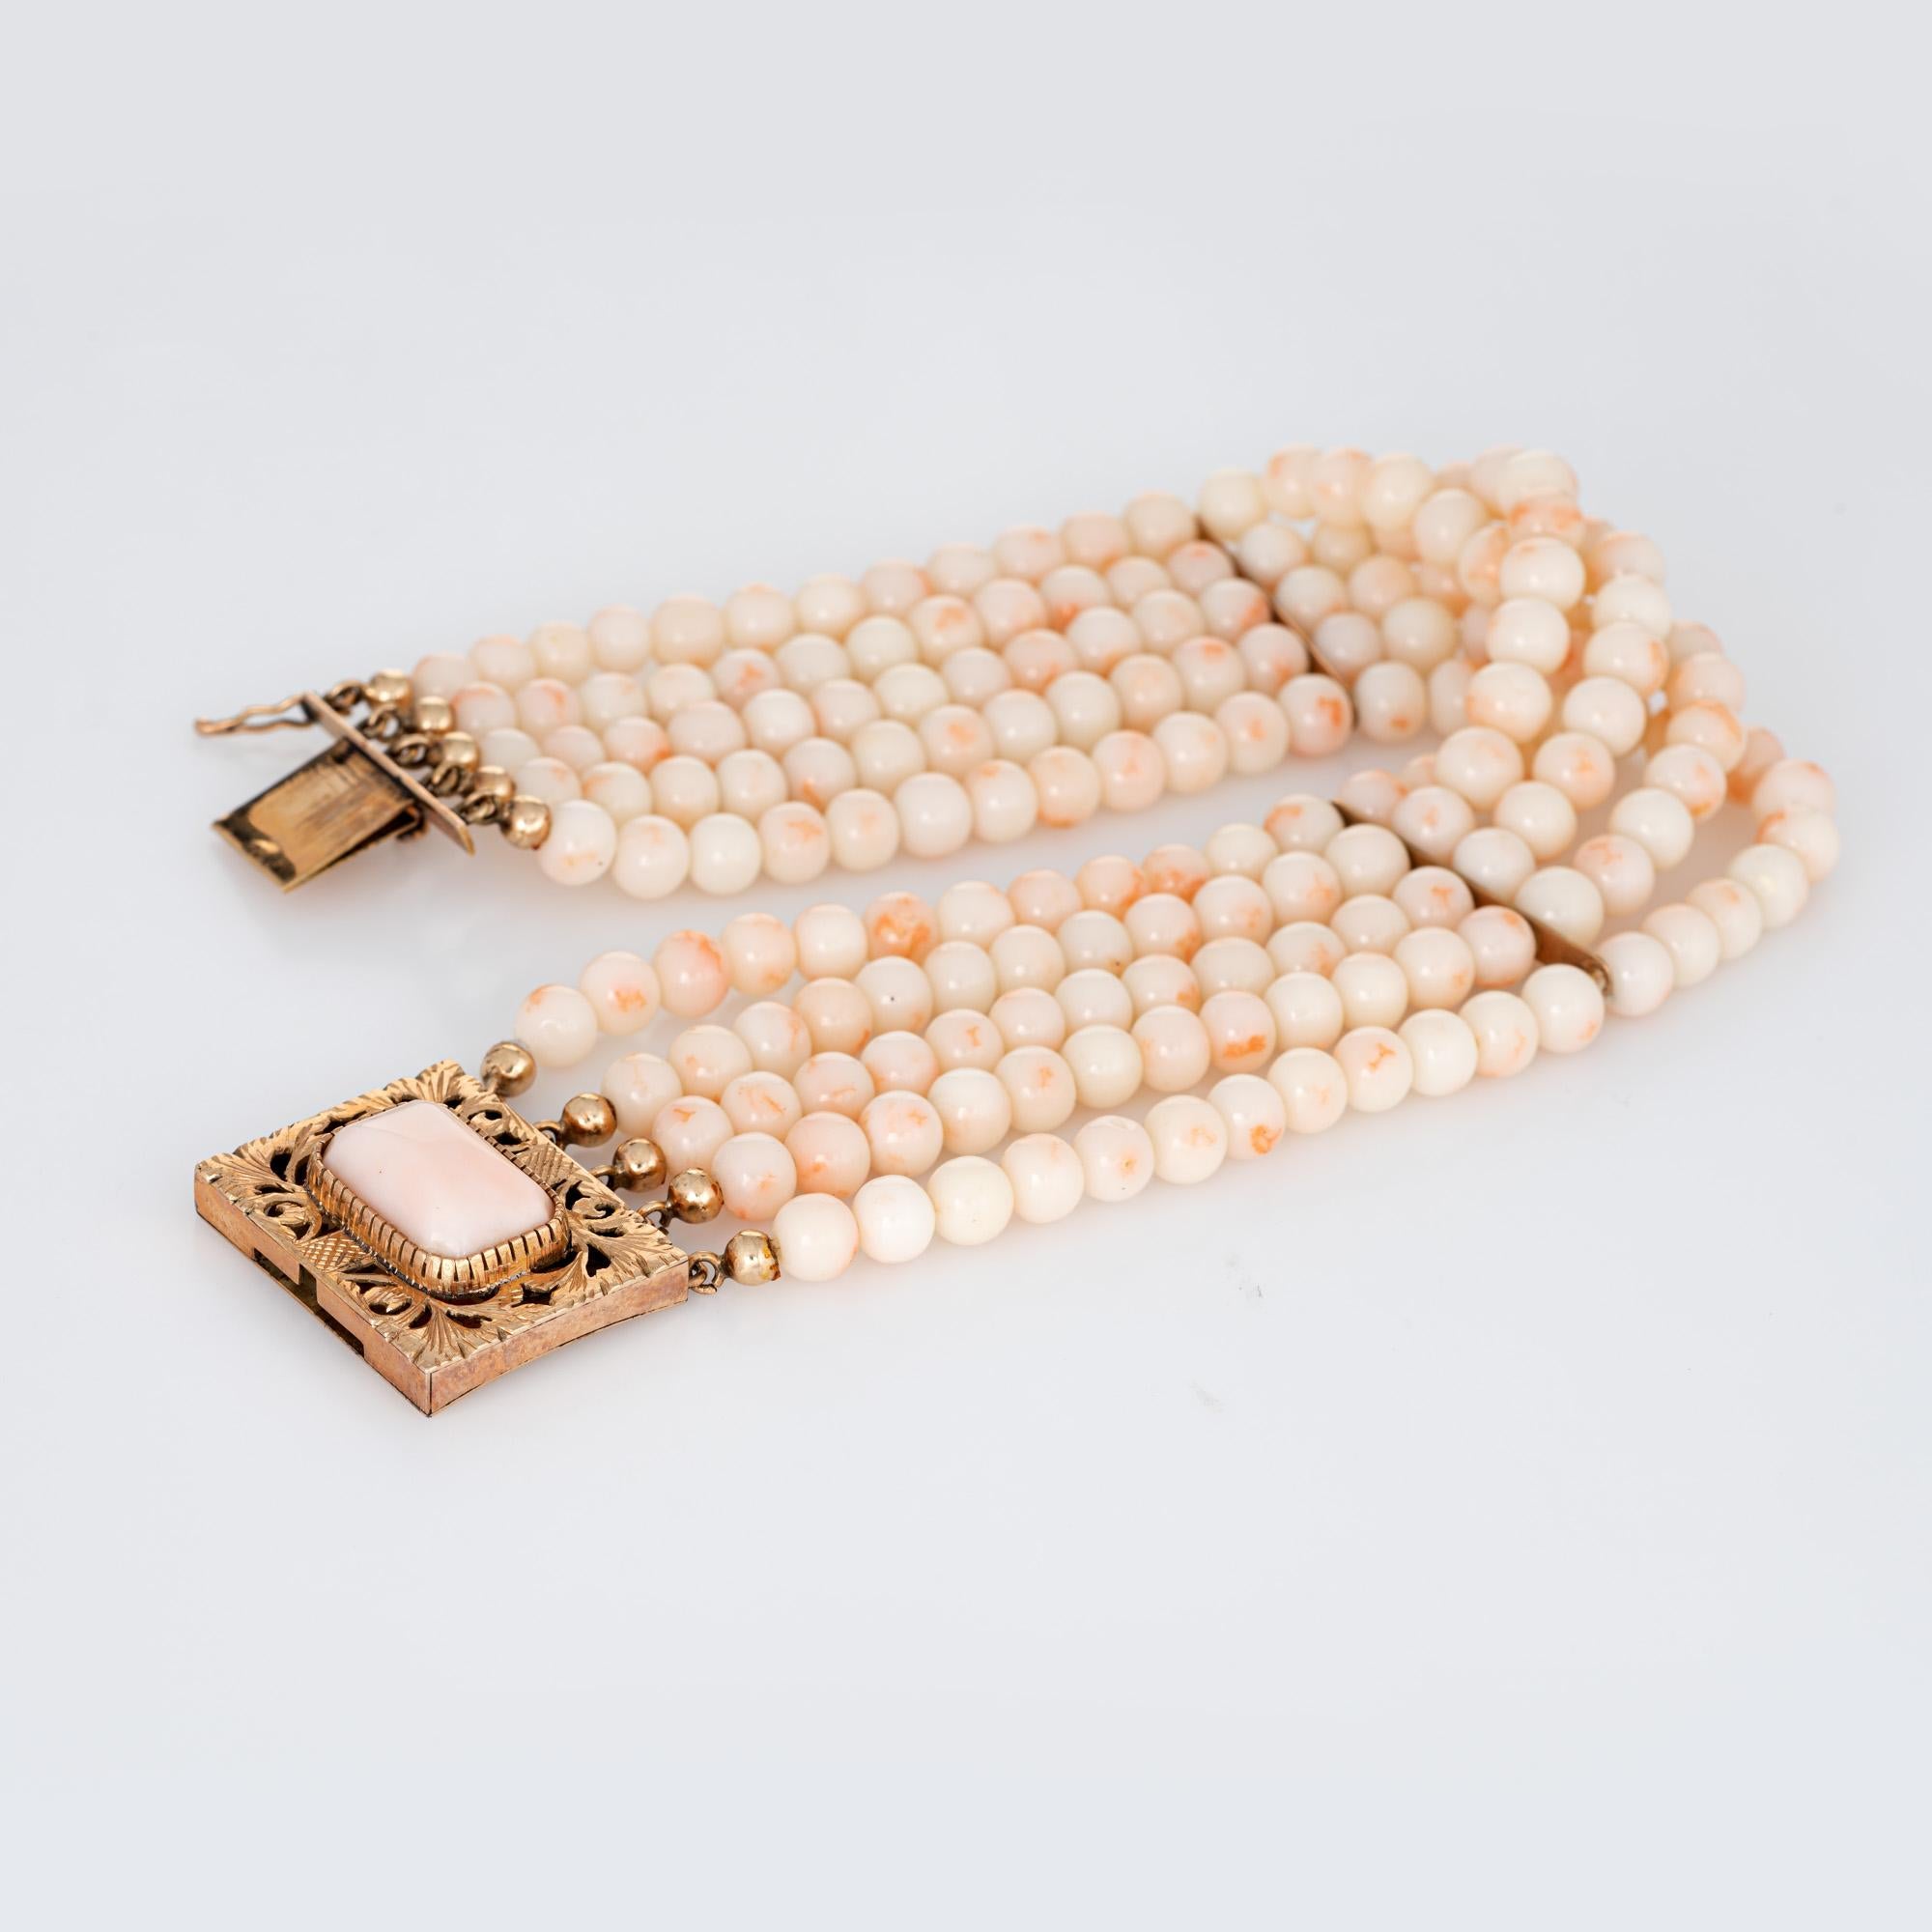 Finely detailed vintage angel skin coral bracelet finished with a 14 karat yellow gold clasp (circa 1950s to 1960s). 

5 strands of angel skin coral beads are uniform in size measuring 5mm each. The clasp is set with a 14mm x 8mm piece of angel skin